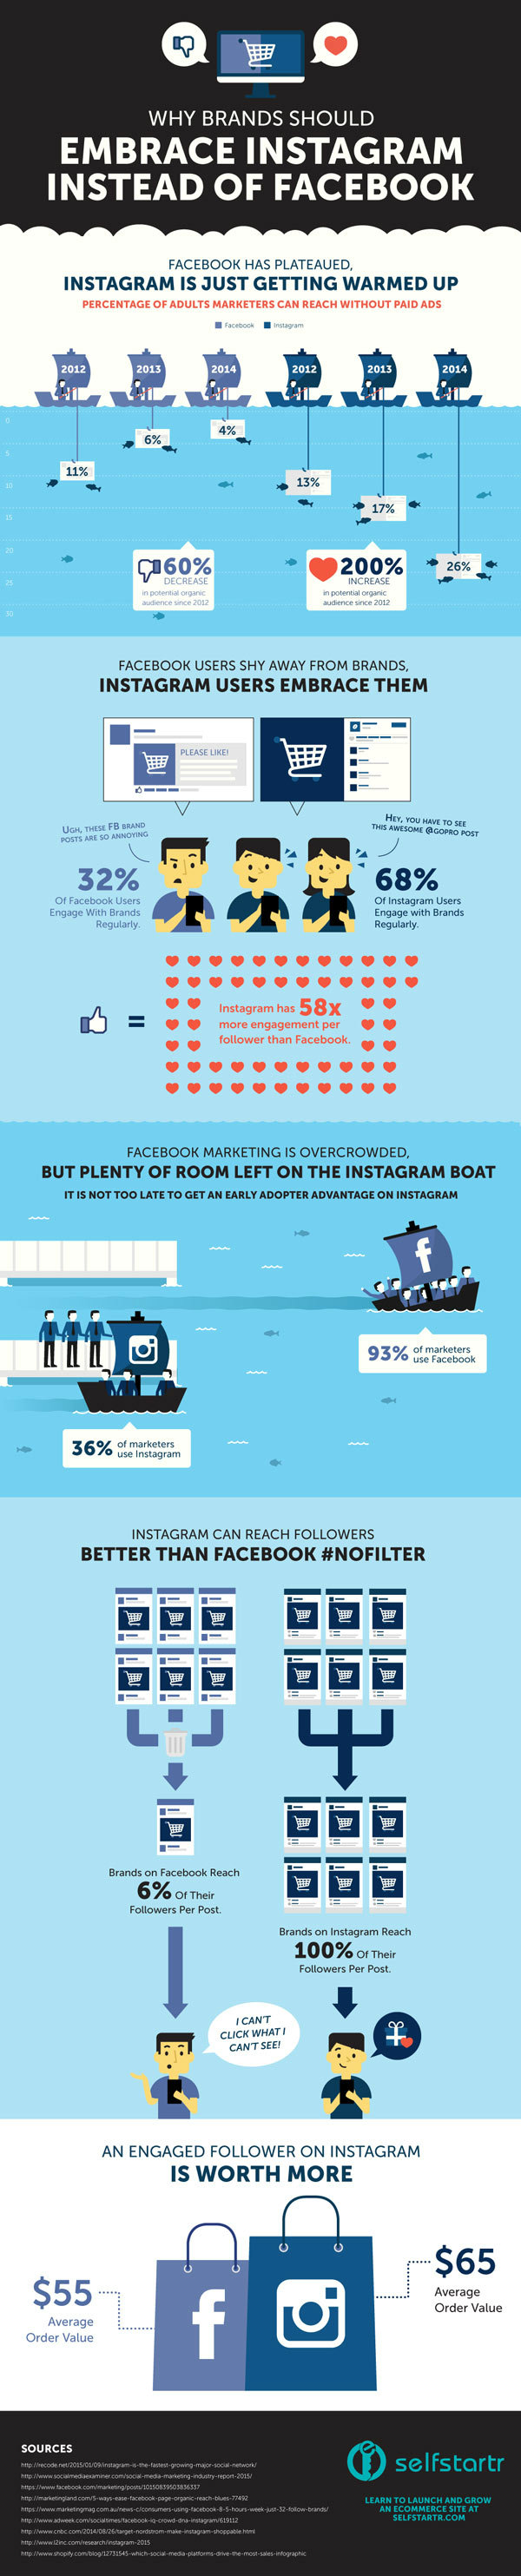 Why-Brands-Should-Embrace-Instagram-Instead-of-Facebook-INFOGRAPHIC-by-selfstartr